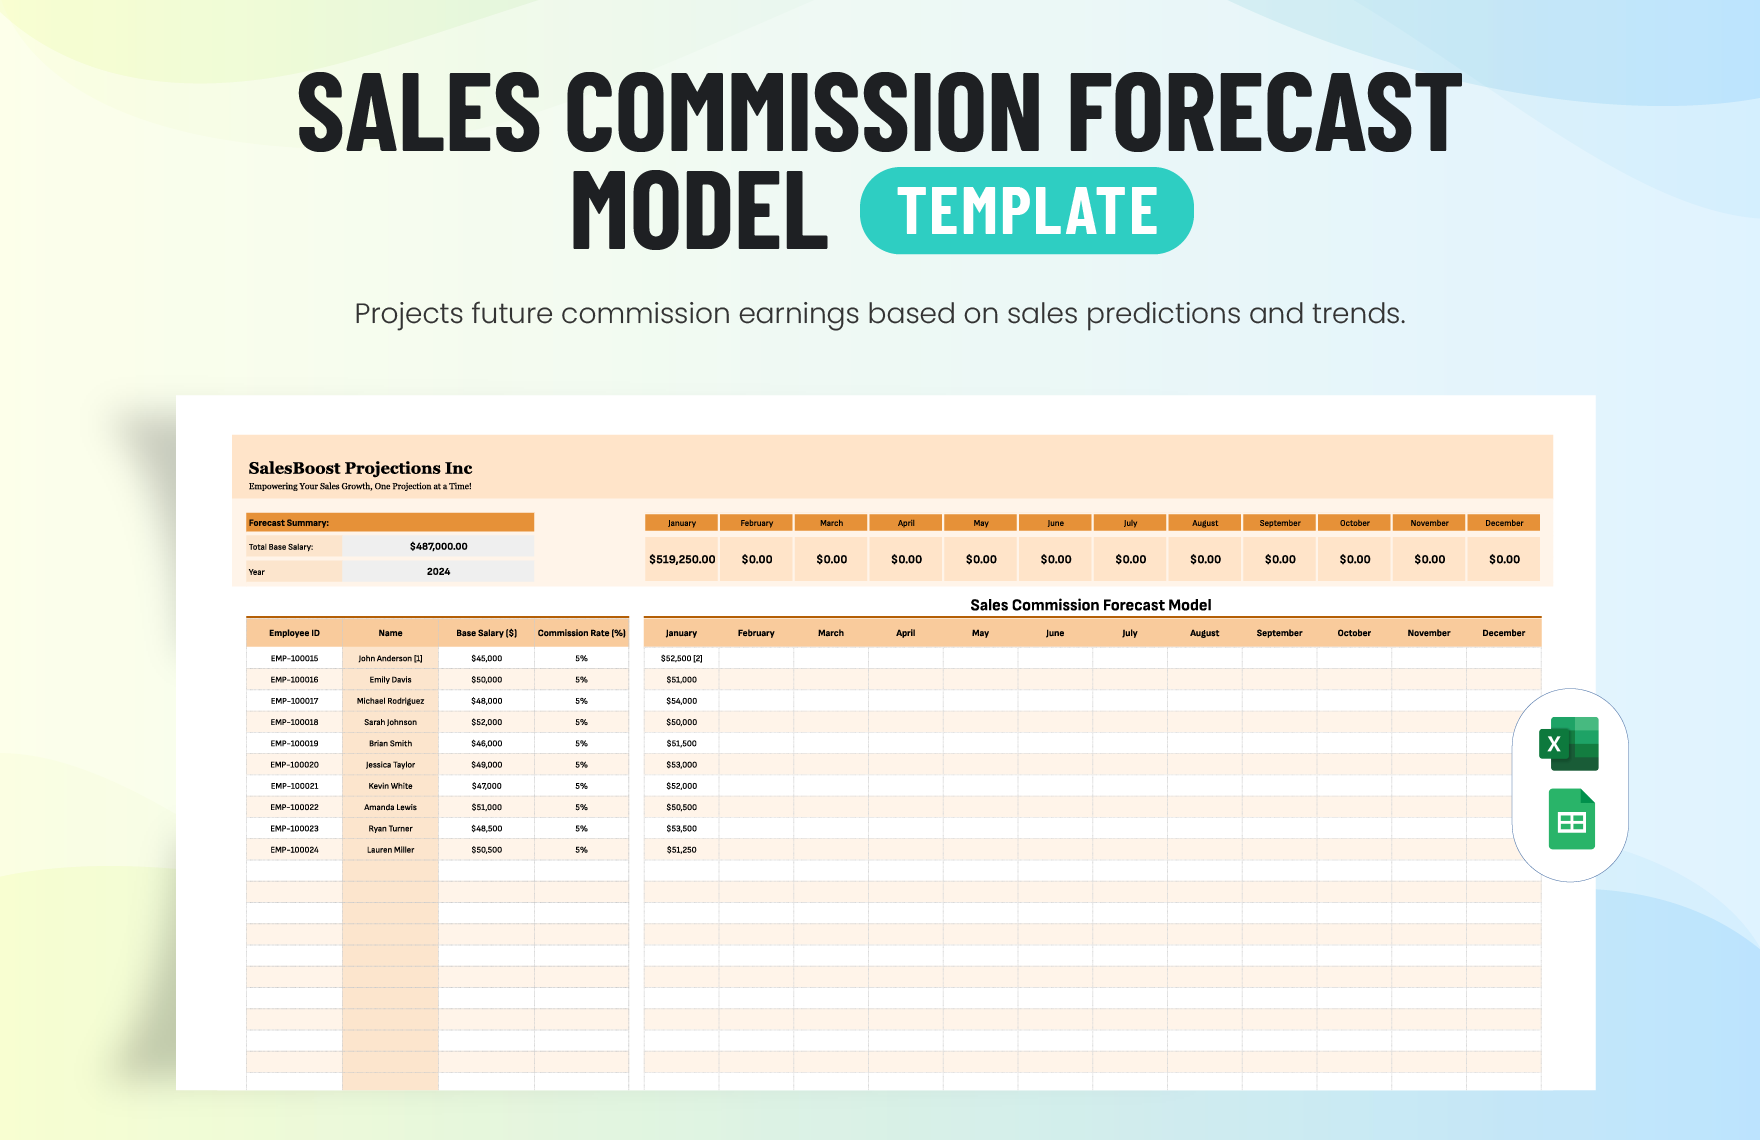 Sales Commission Forecast Model Template